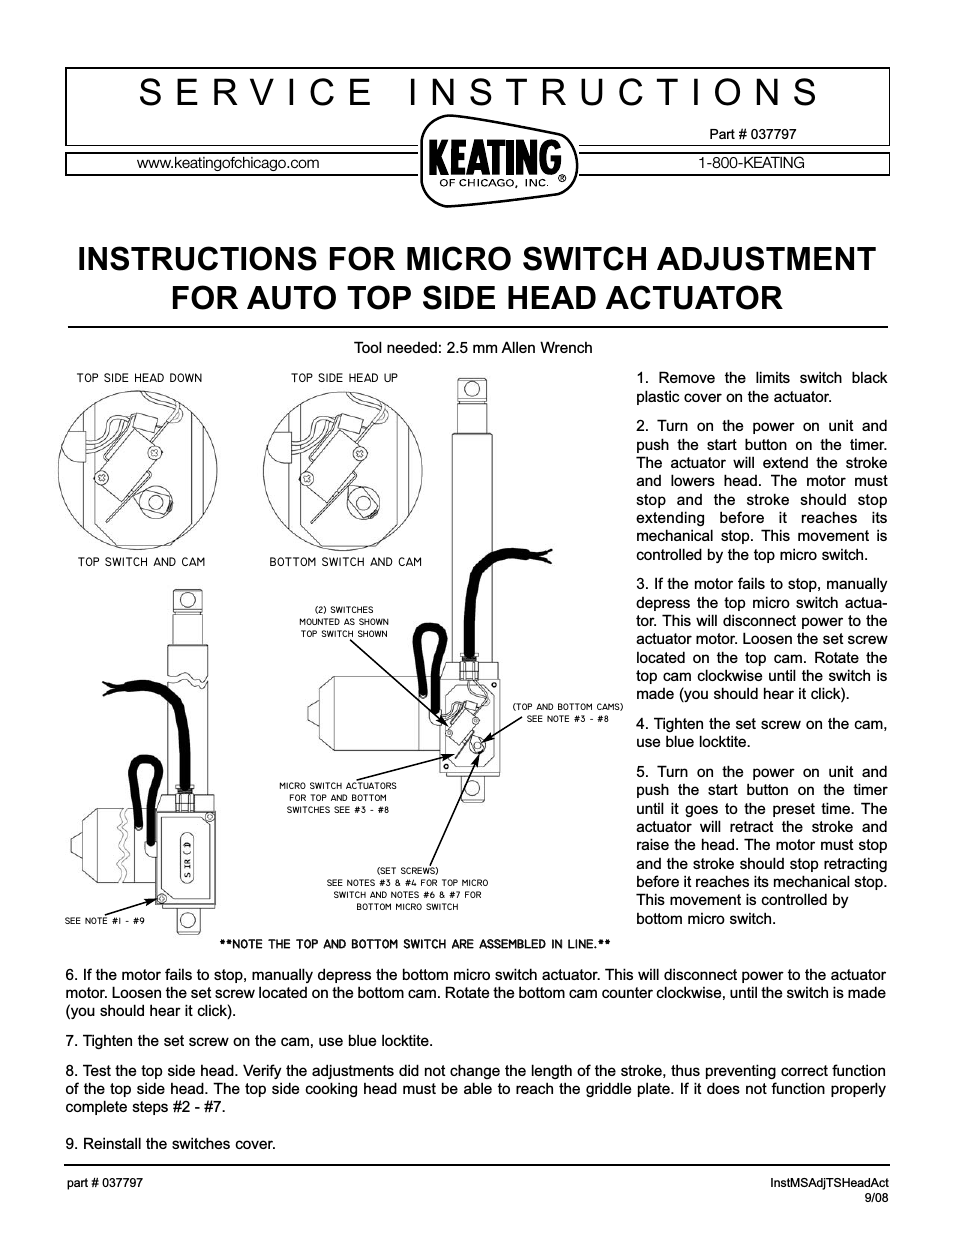 Macro Switch Adjustment For Auto Top Side Head Actuator